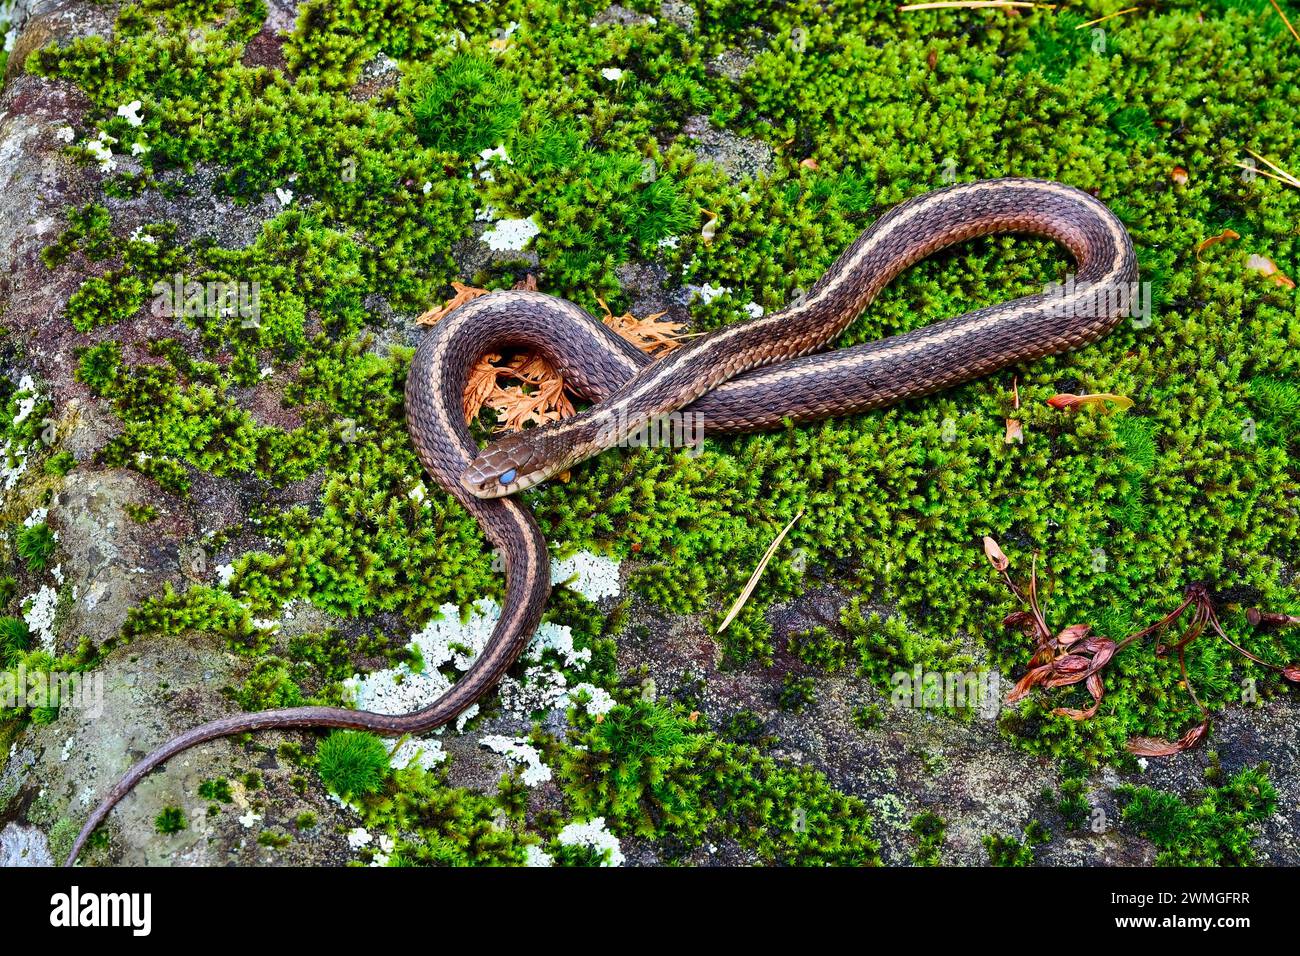 A Garter snake in the wild, on moss and leaves Stock Photo